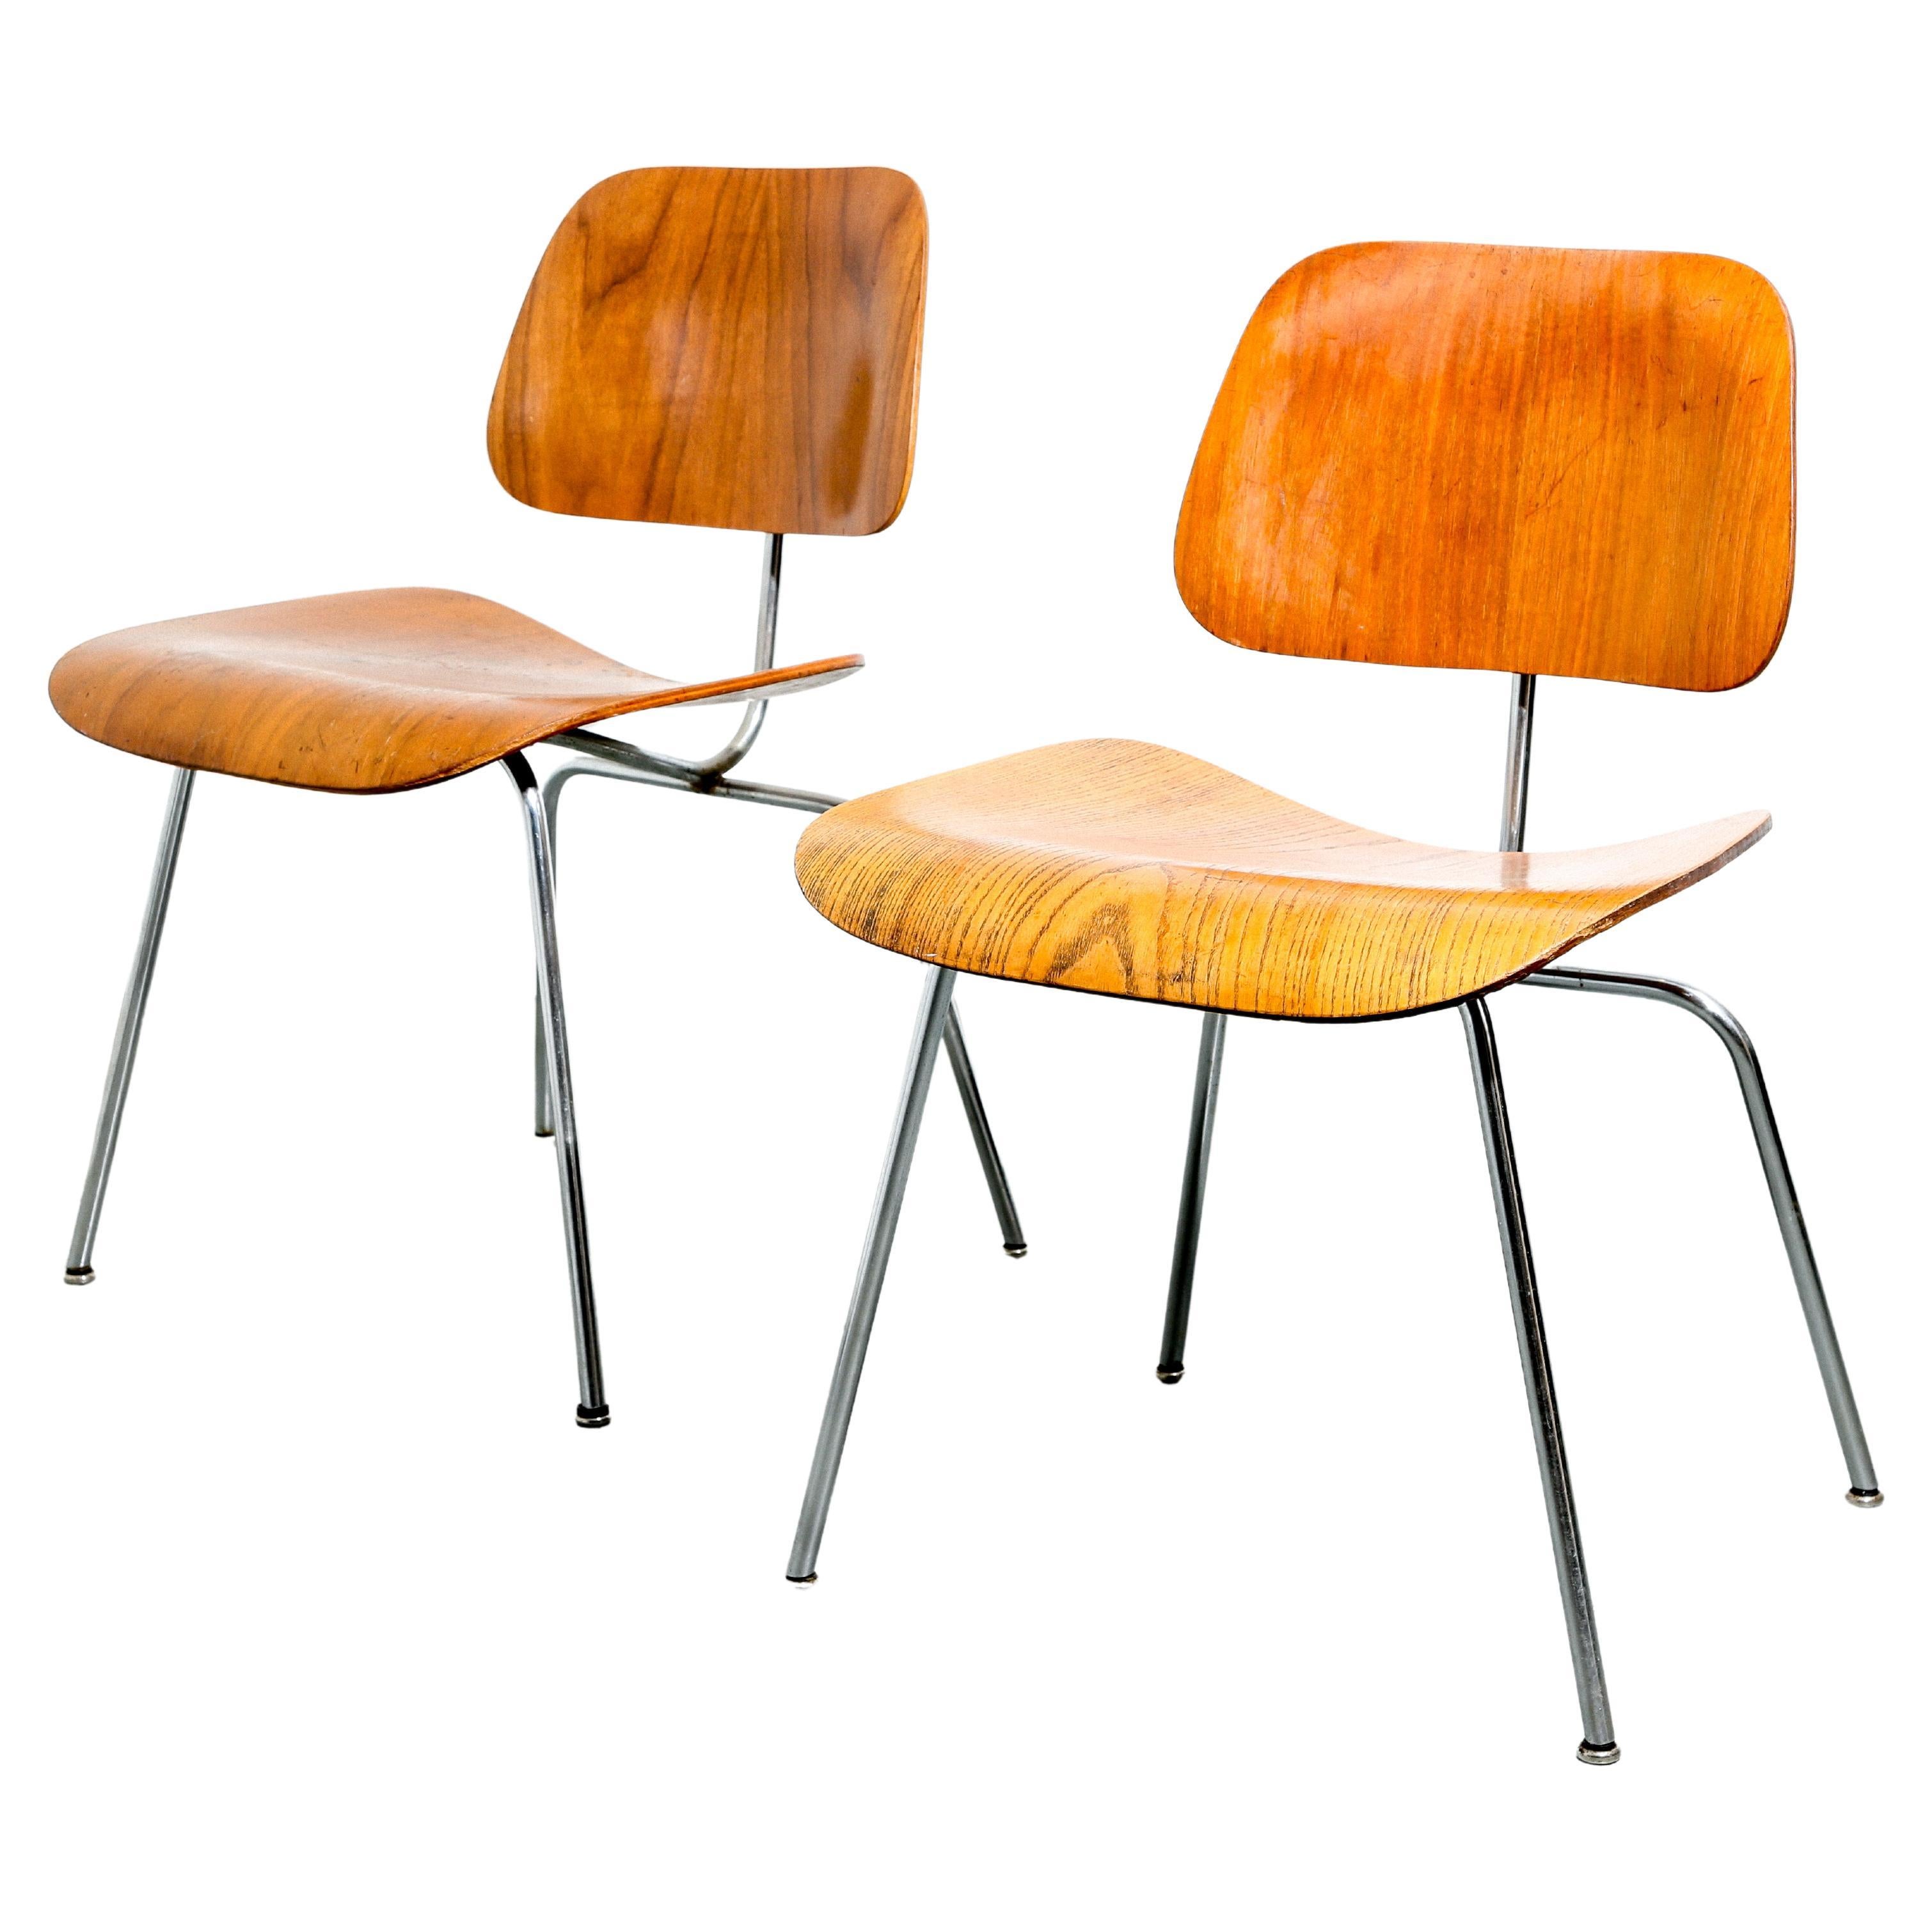 Pair Of 1St Generation Eames Dcm Chairs (Evans)